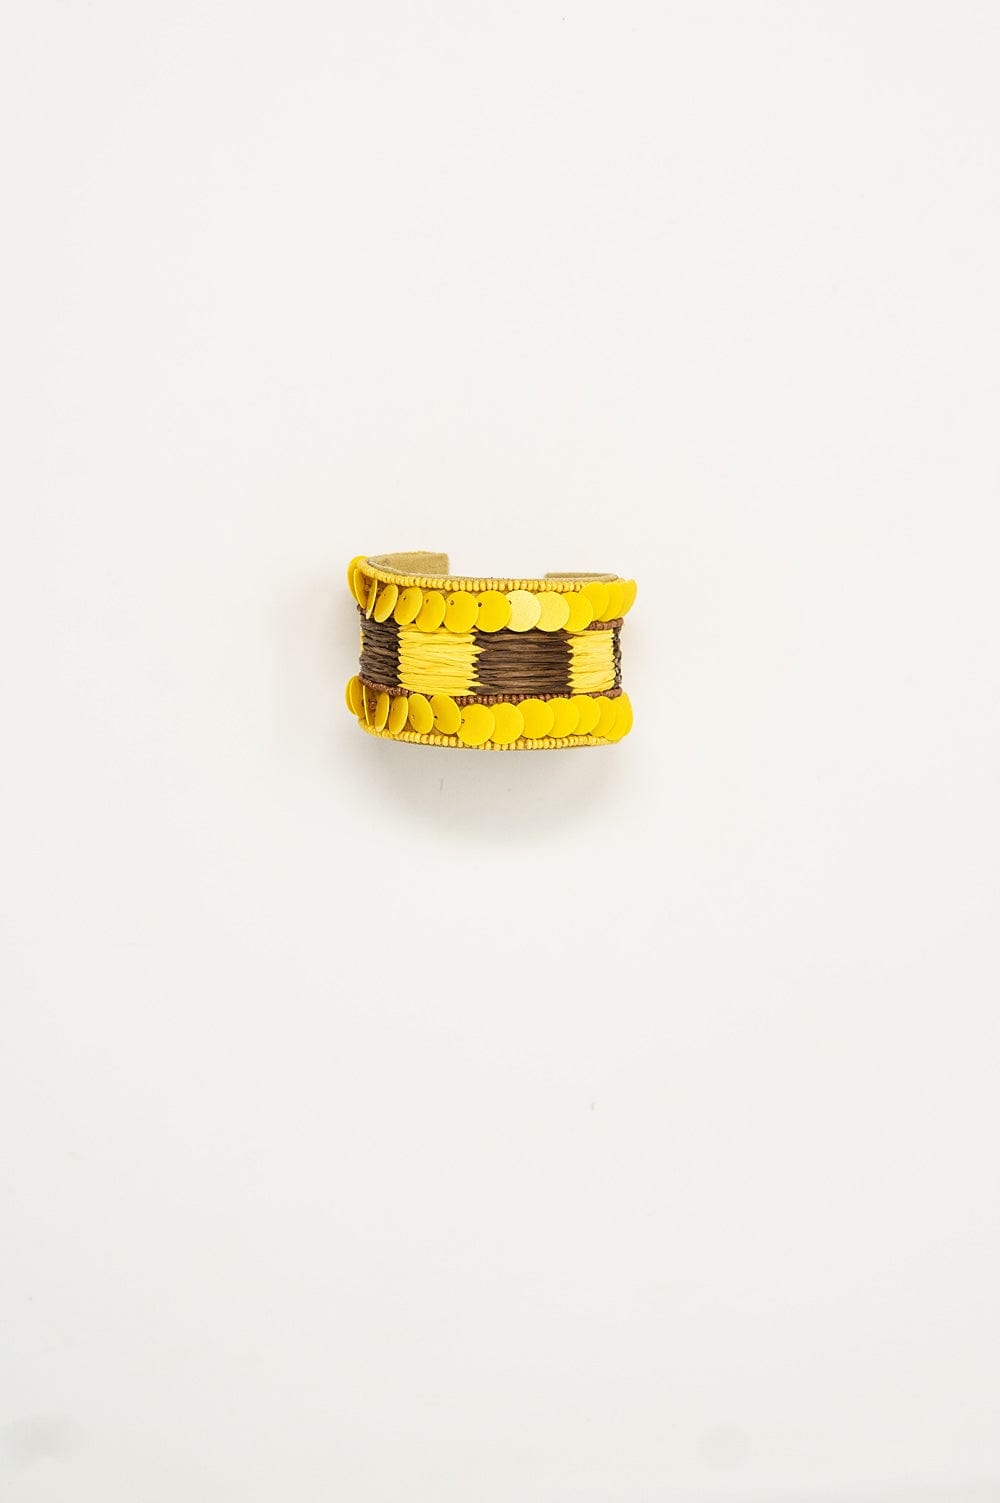 Q2 Women's Bracelet One Size / Yellow Yellow And Brown Thick Open Bracelet Wtih Yellow Bead Accents